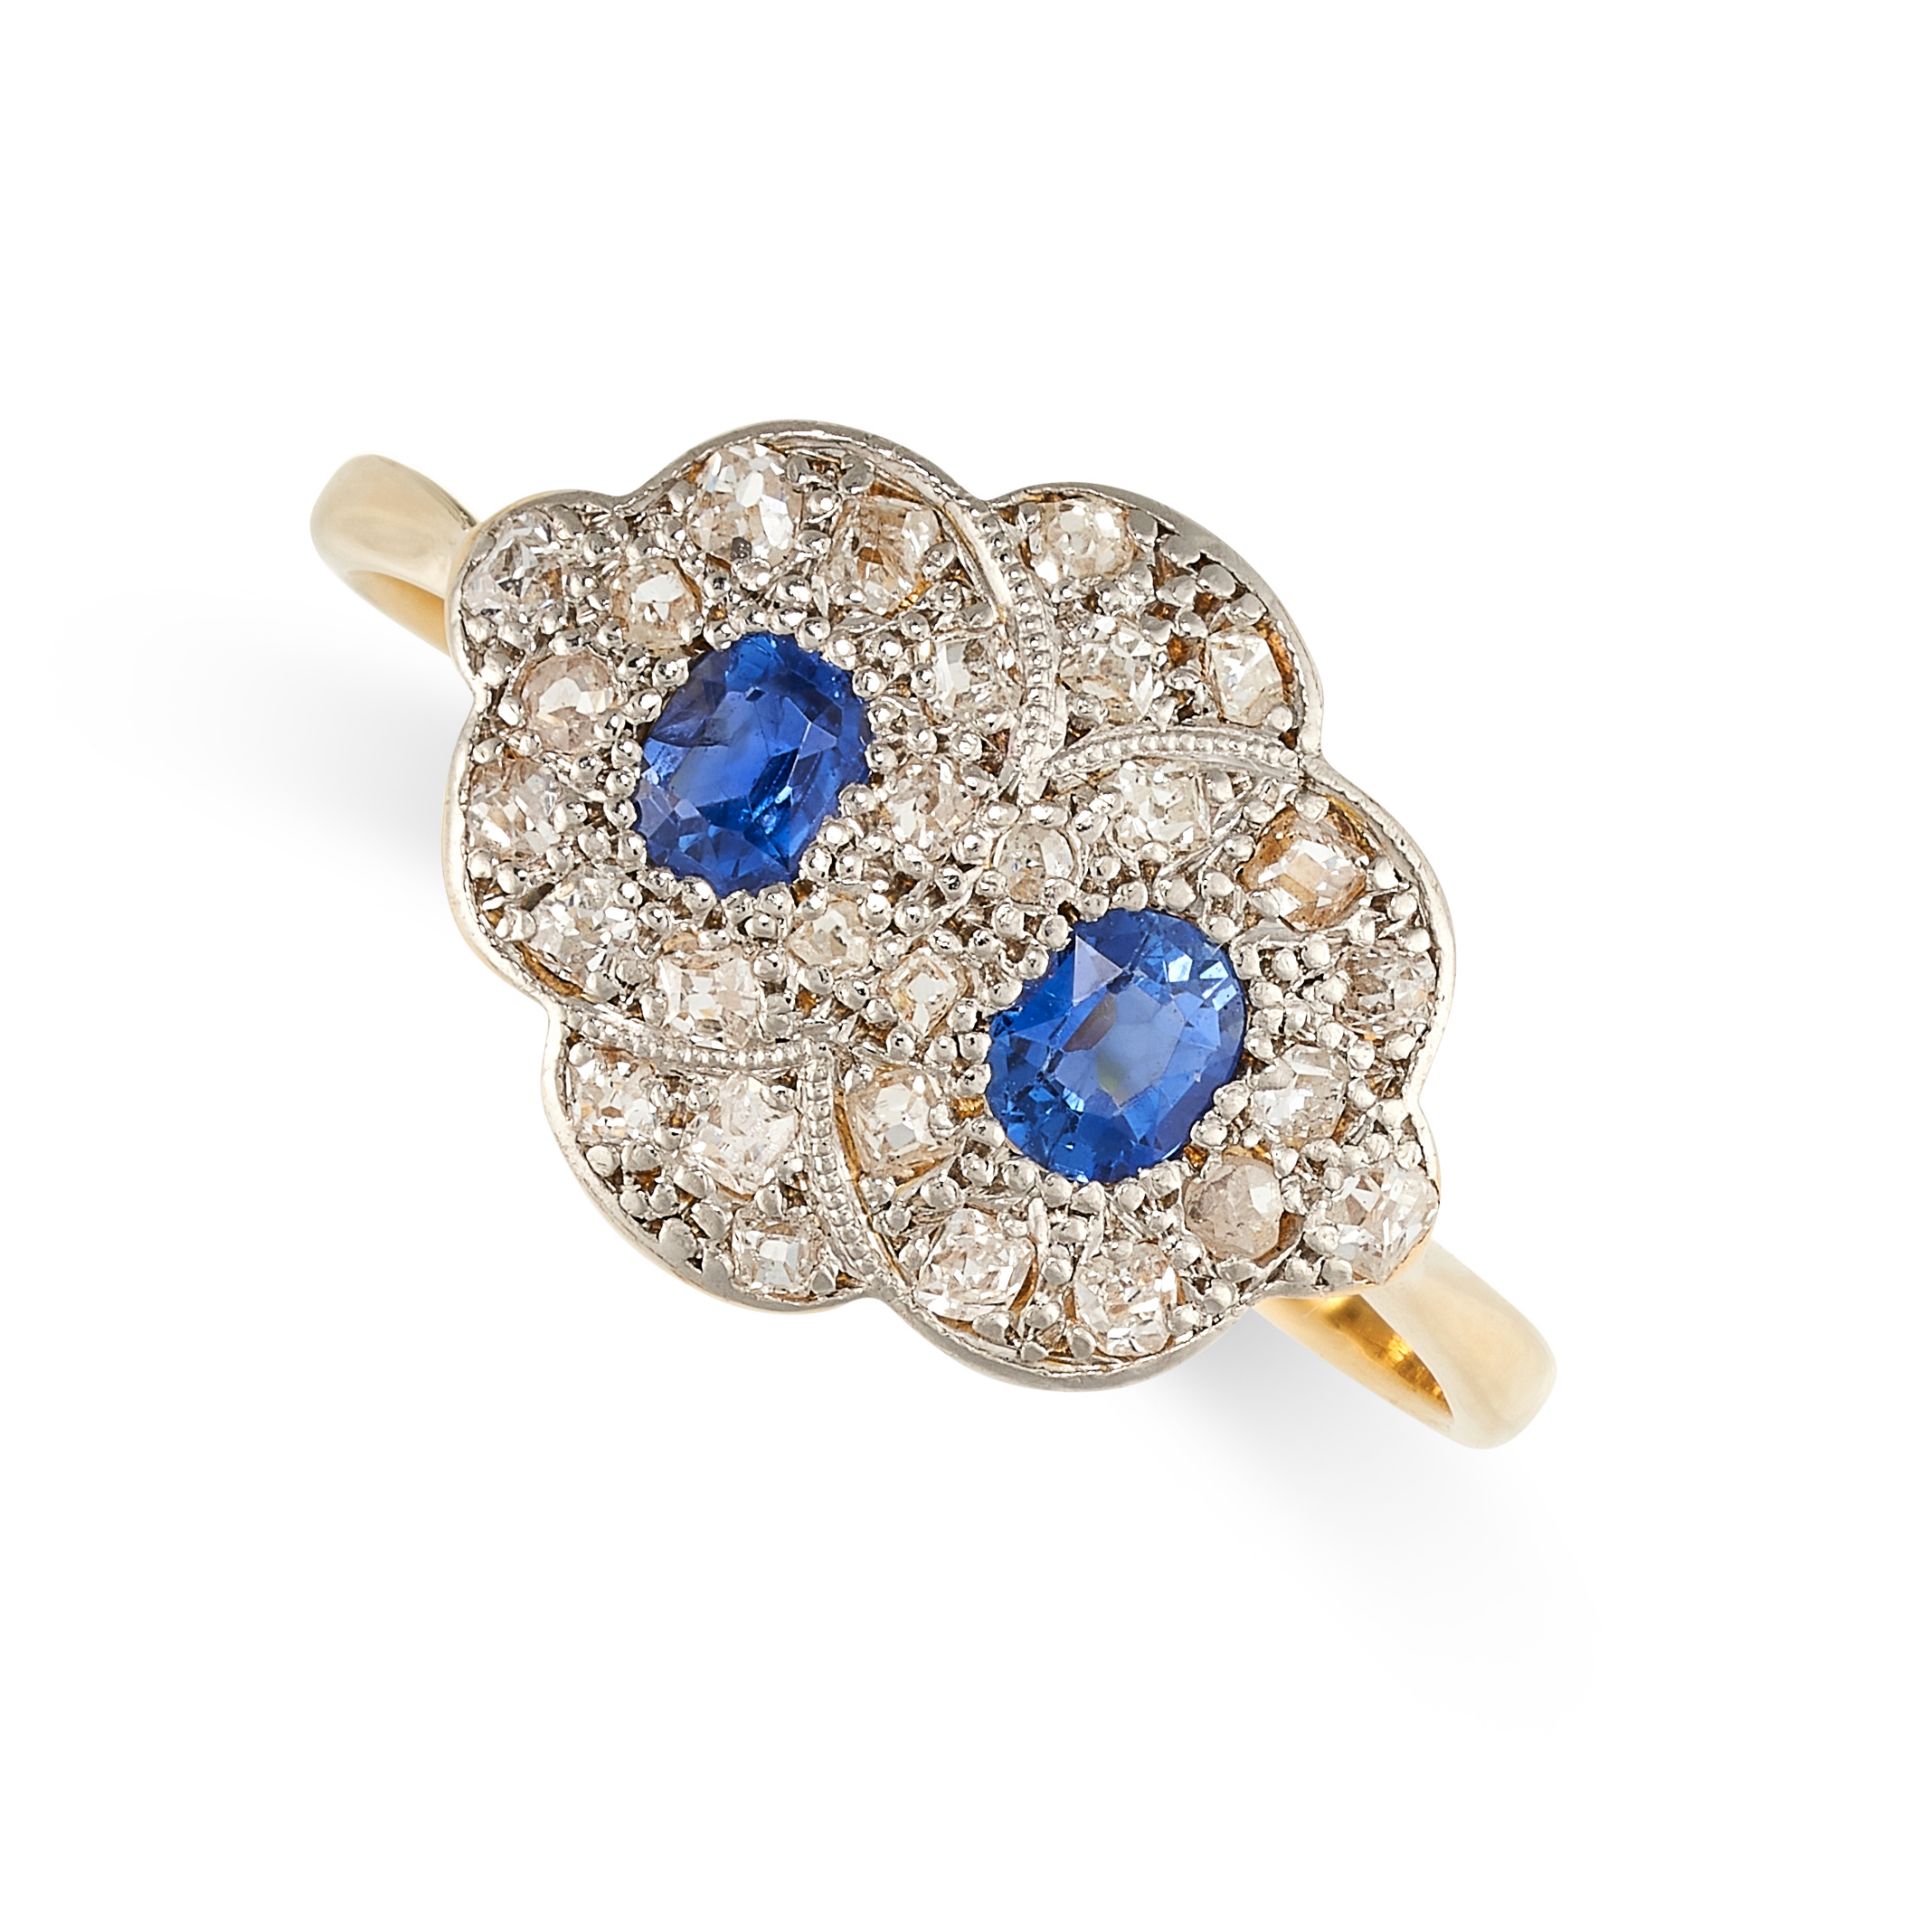 NO RESERVE - A SAPPHIRE AND DIAMOND RING in 18ct yellow gold and platinum, the scalloped face set